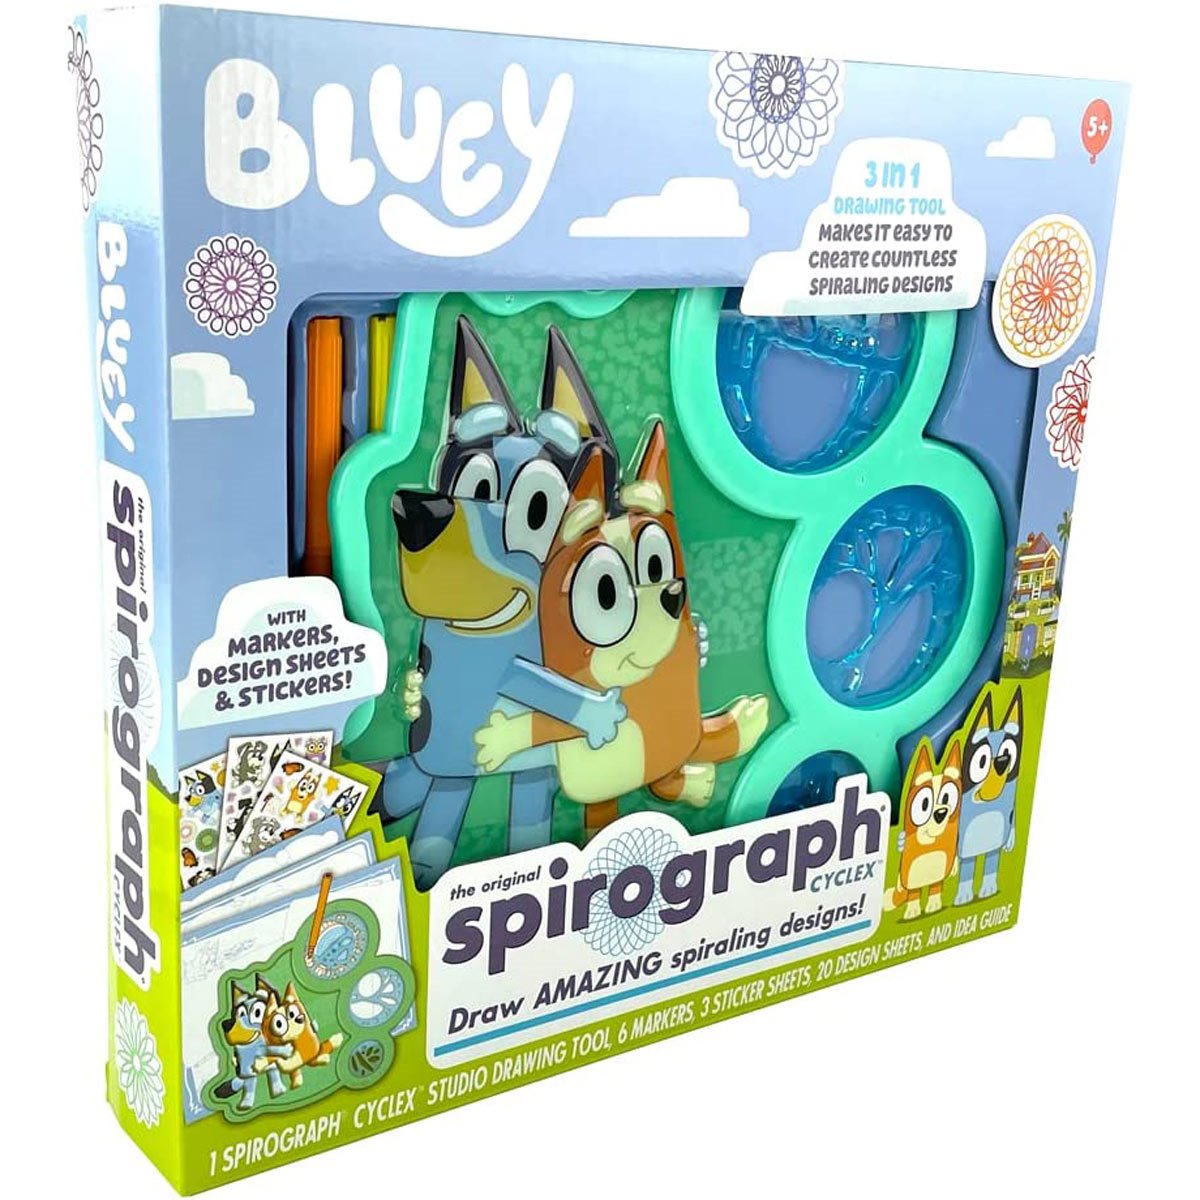 The Original Spirograph Jr. In Excellent Used Condition.